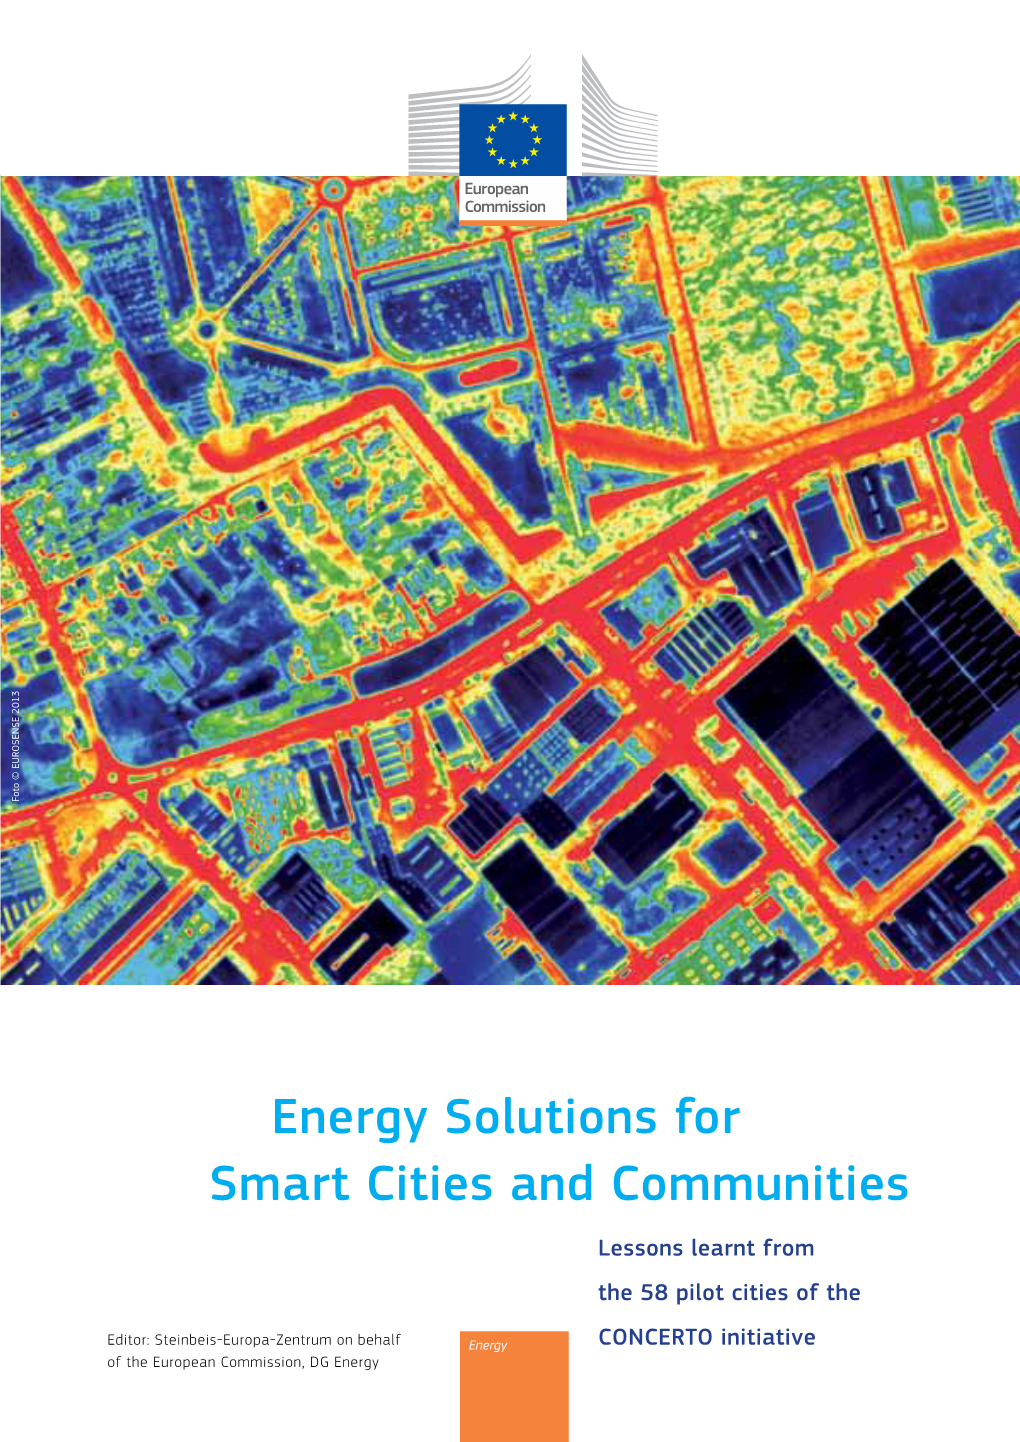 Energy Solutions for Smart Cities and Communities Lessons Learnt from the 58 Pilot Cities of The